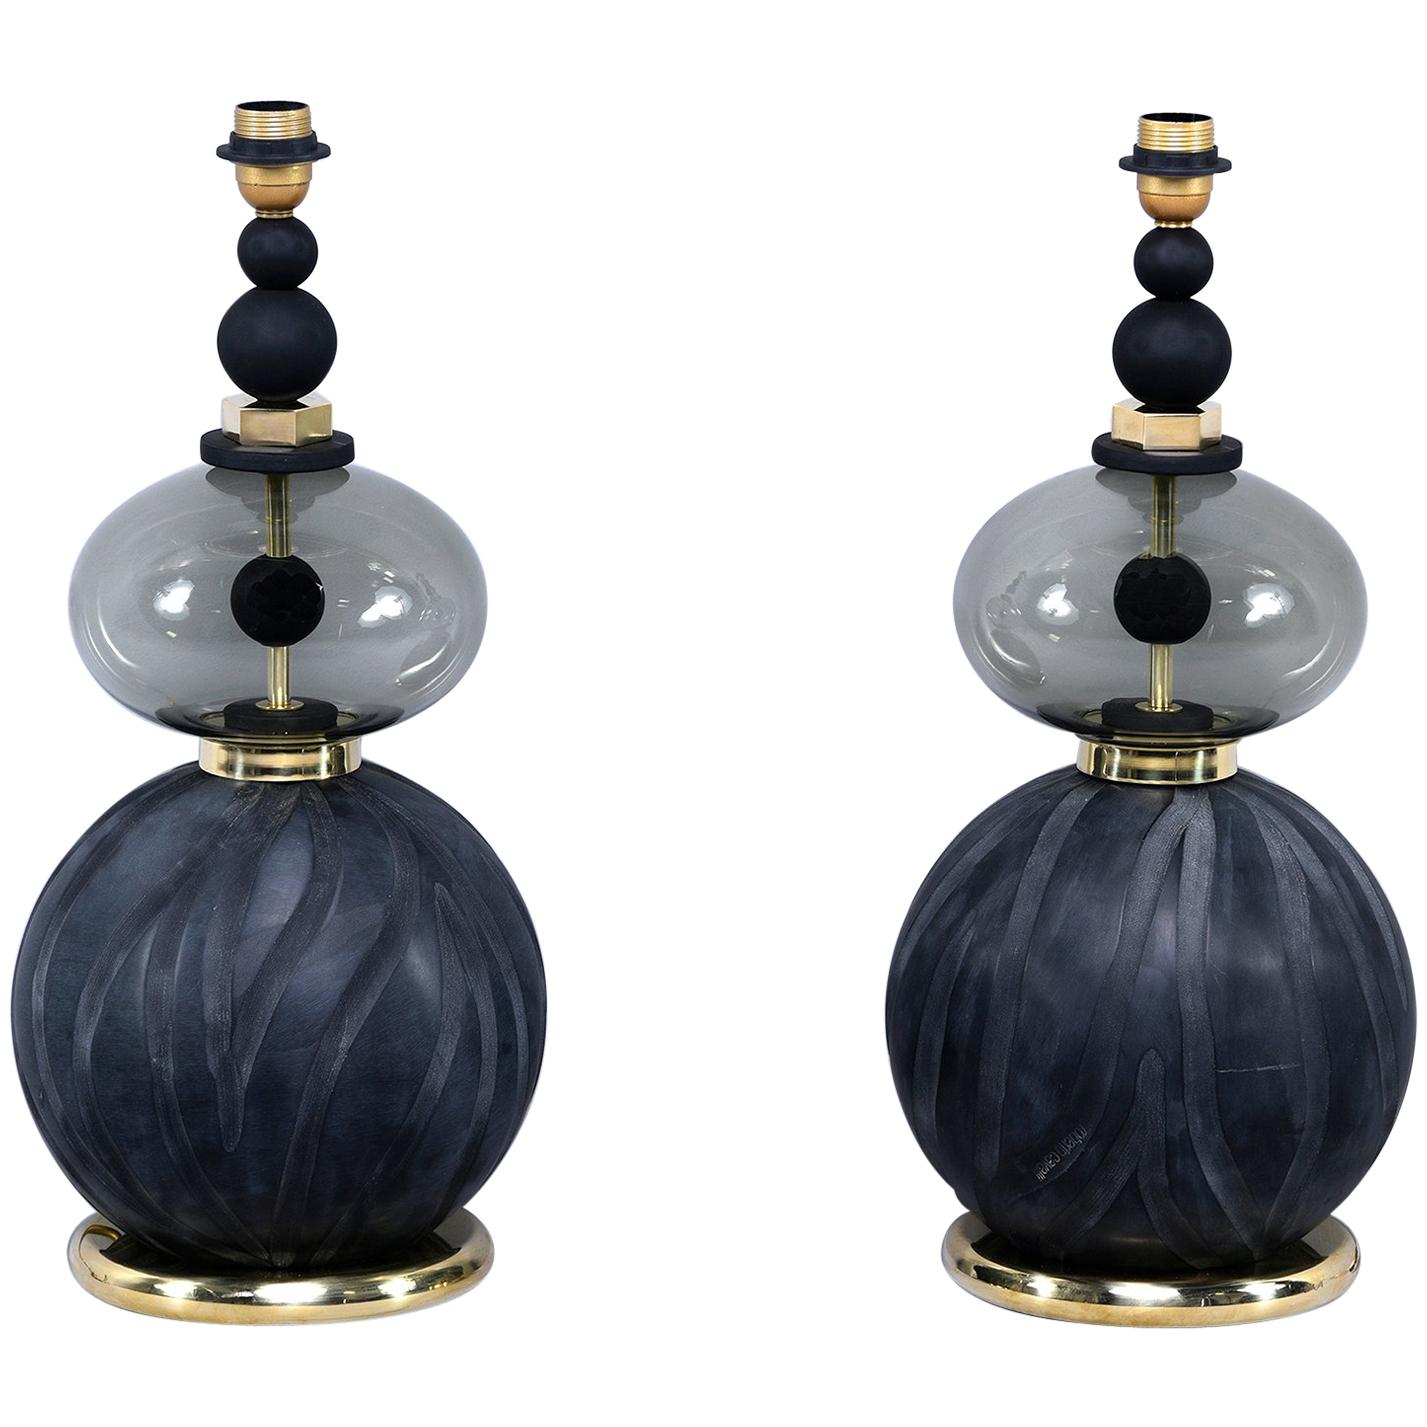 Pair of Signed Roberto Cavalli Black Double Vessel Art Glass Lamps